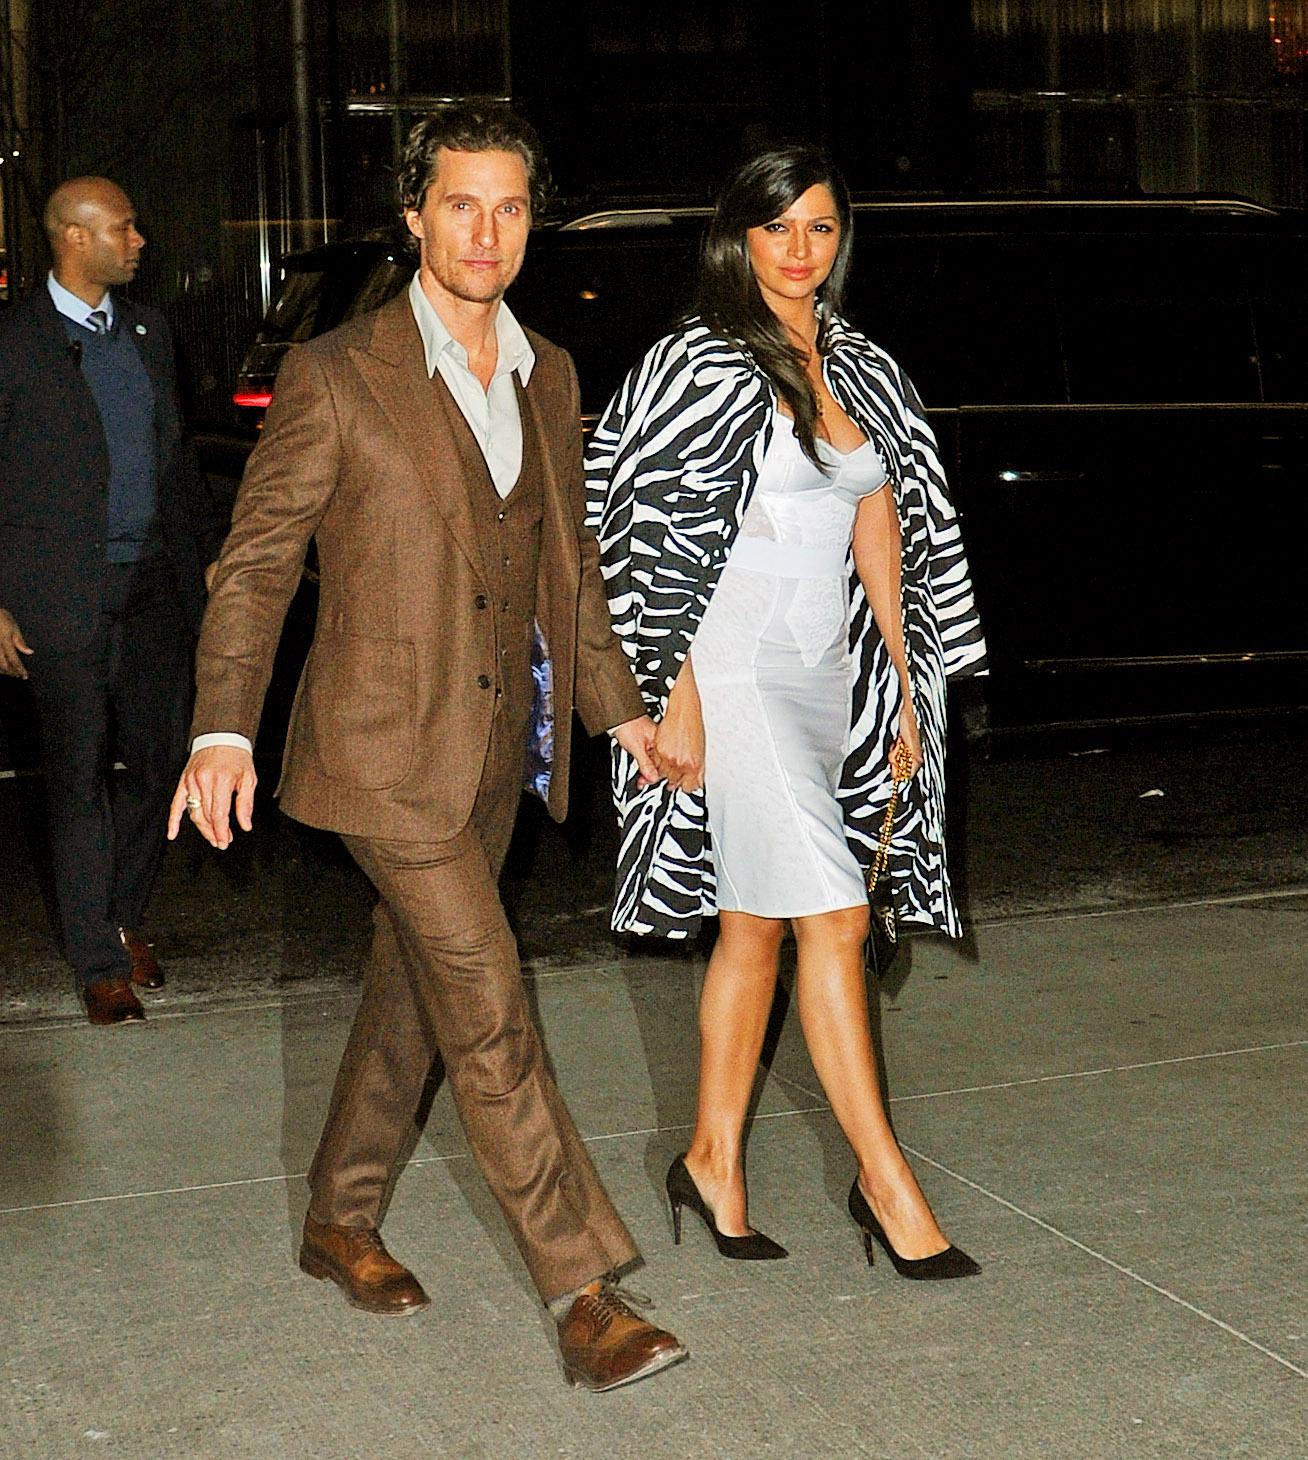 Matthew McConaughey and Camila Alves arrive to the MoMA for "Serenity" premiere